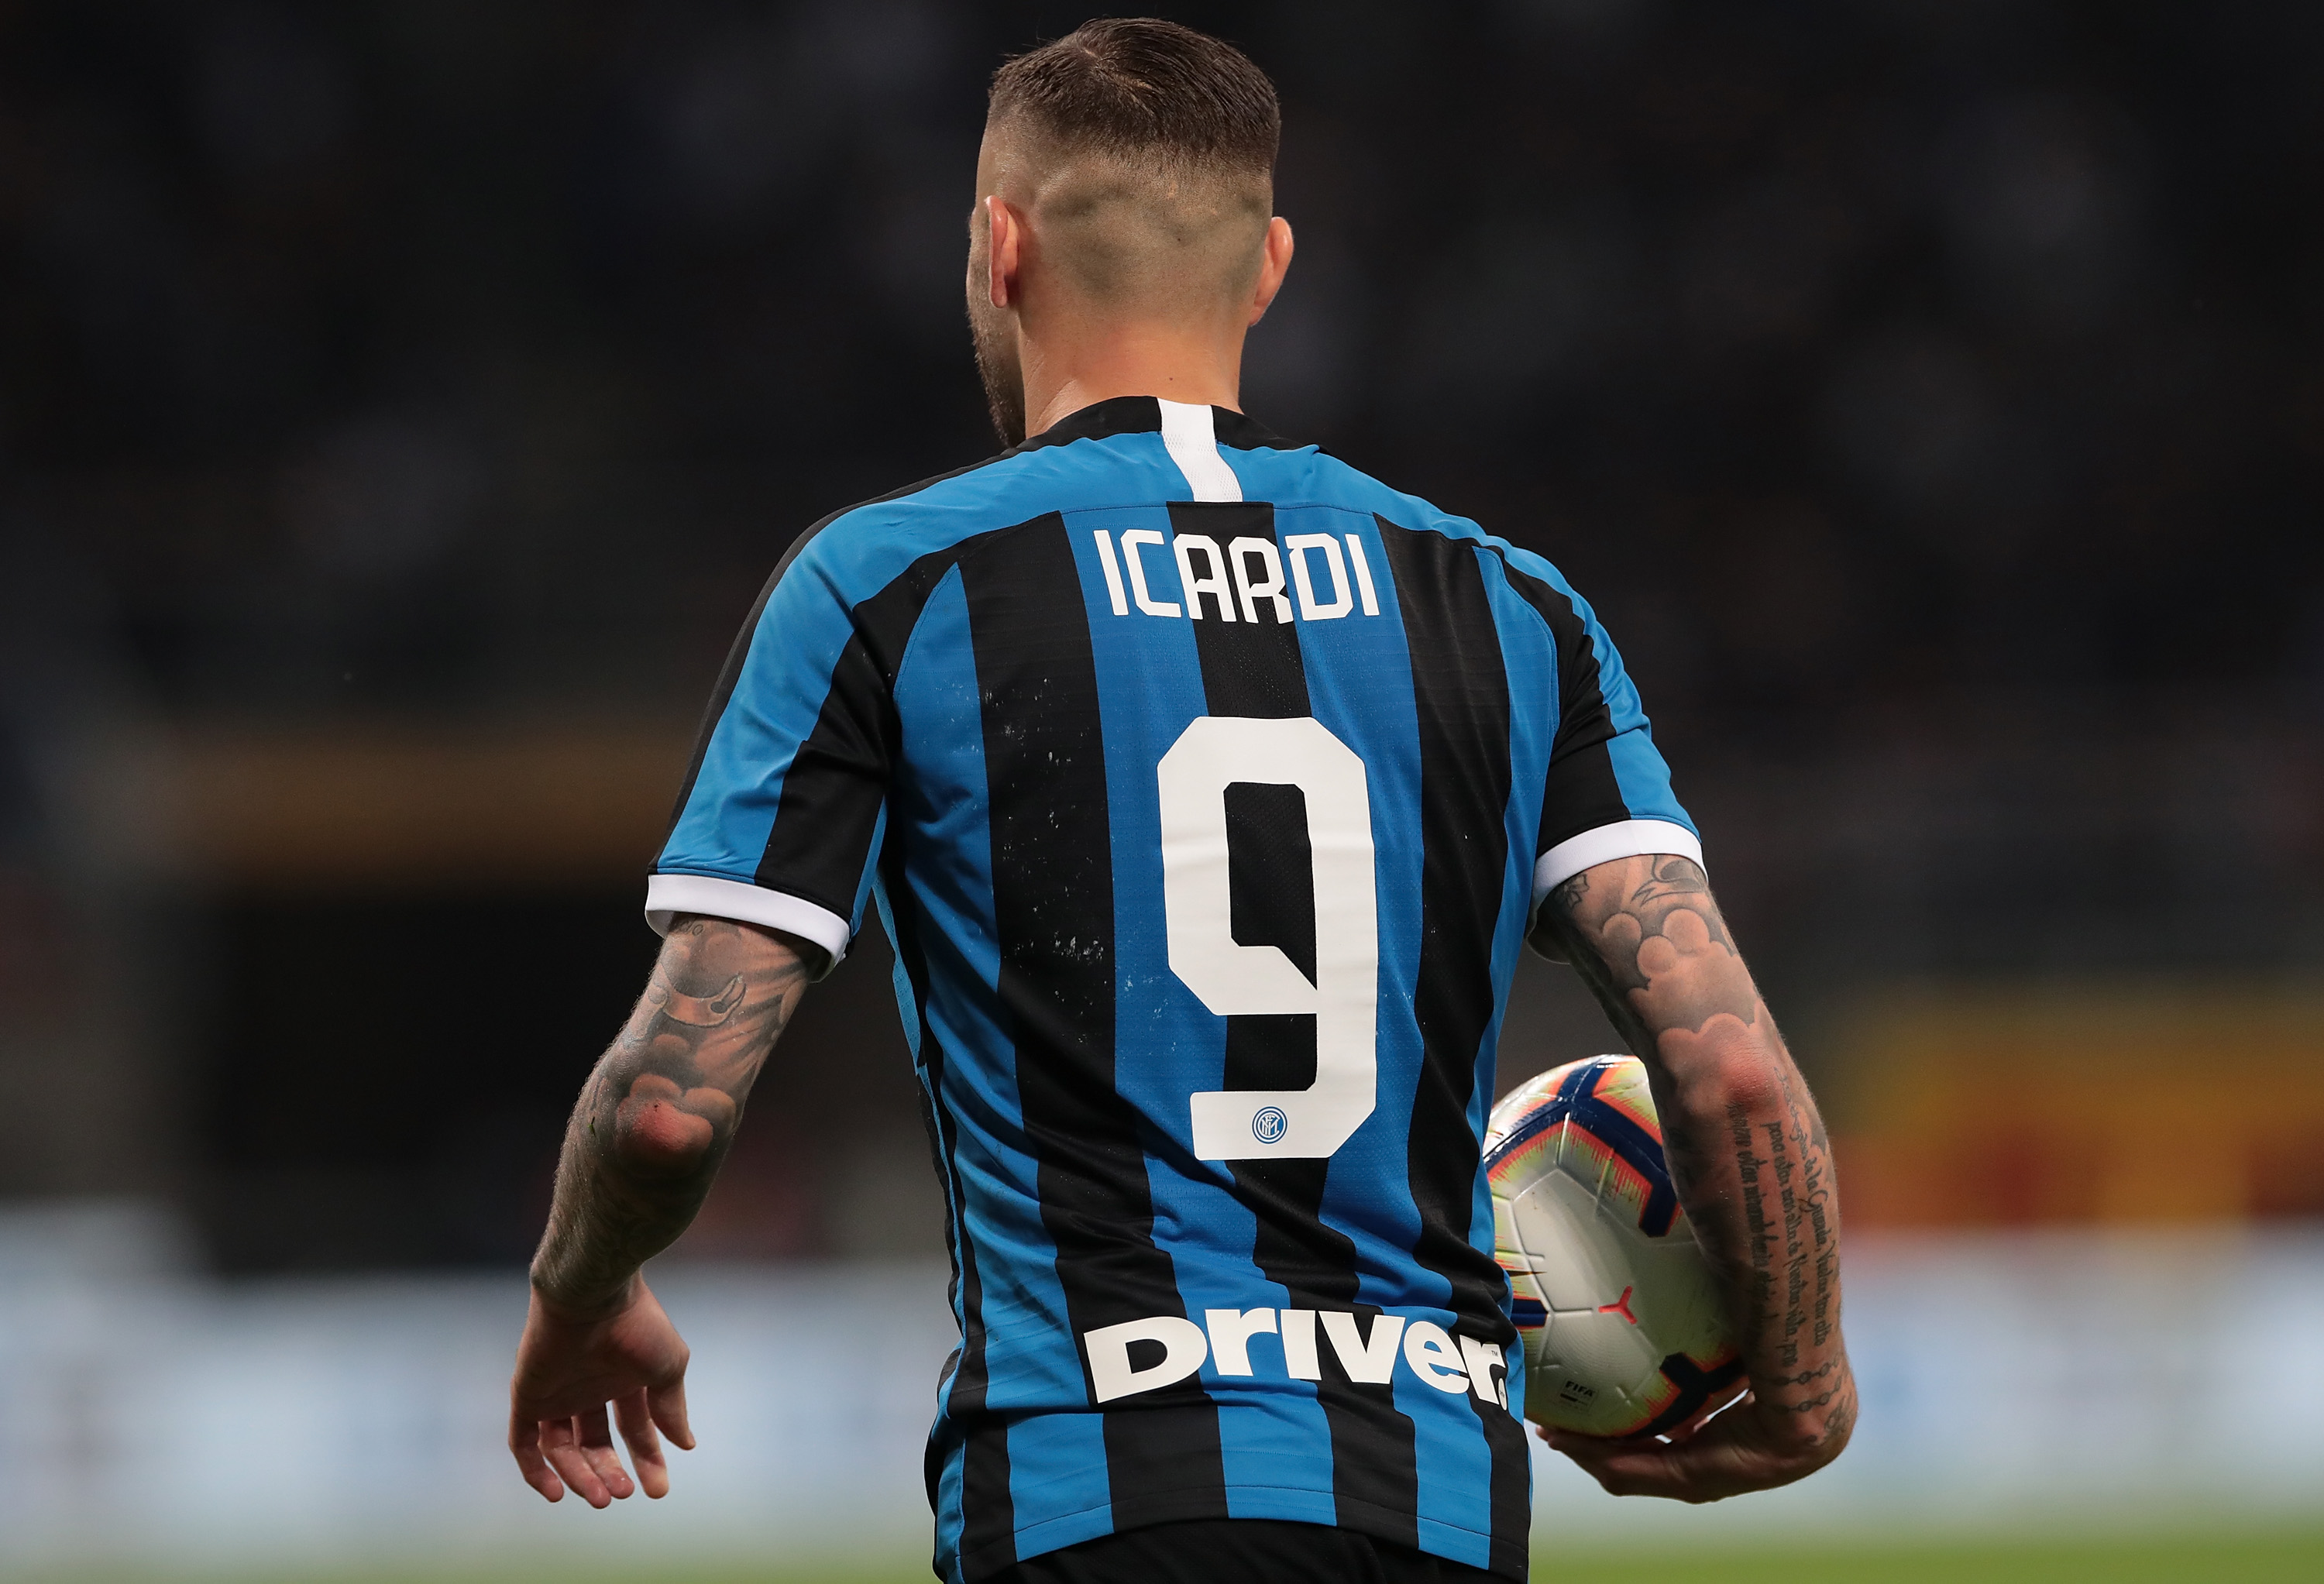 MILAN, ITALY - MAY 26:  Mauro Emanuel Icardi of FC Internazionale looks dejected during the Serie A match between FC Internazionale and Empoli FC at Stadio Giuseppe Meazza on May 26, 2019 in Milan, Italy.  (Photo by Emilio Andreoli/Getty Images)